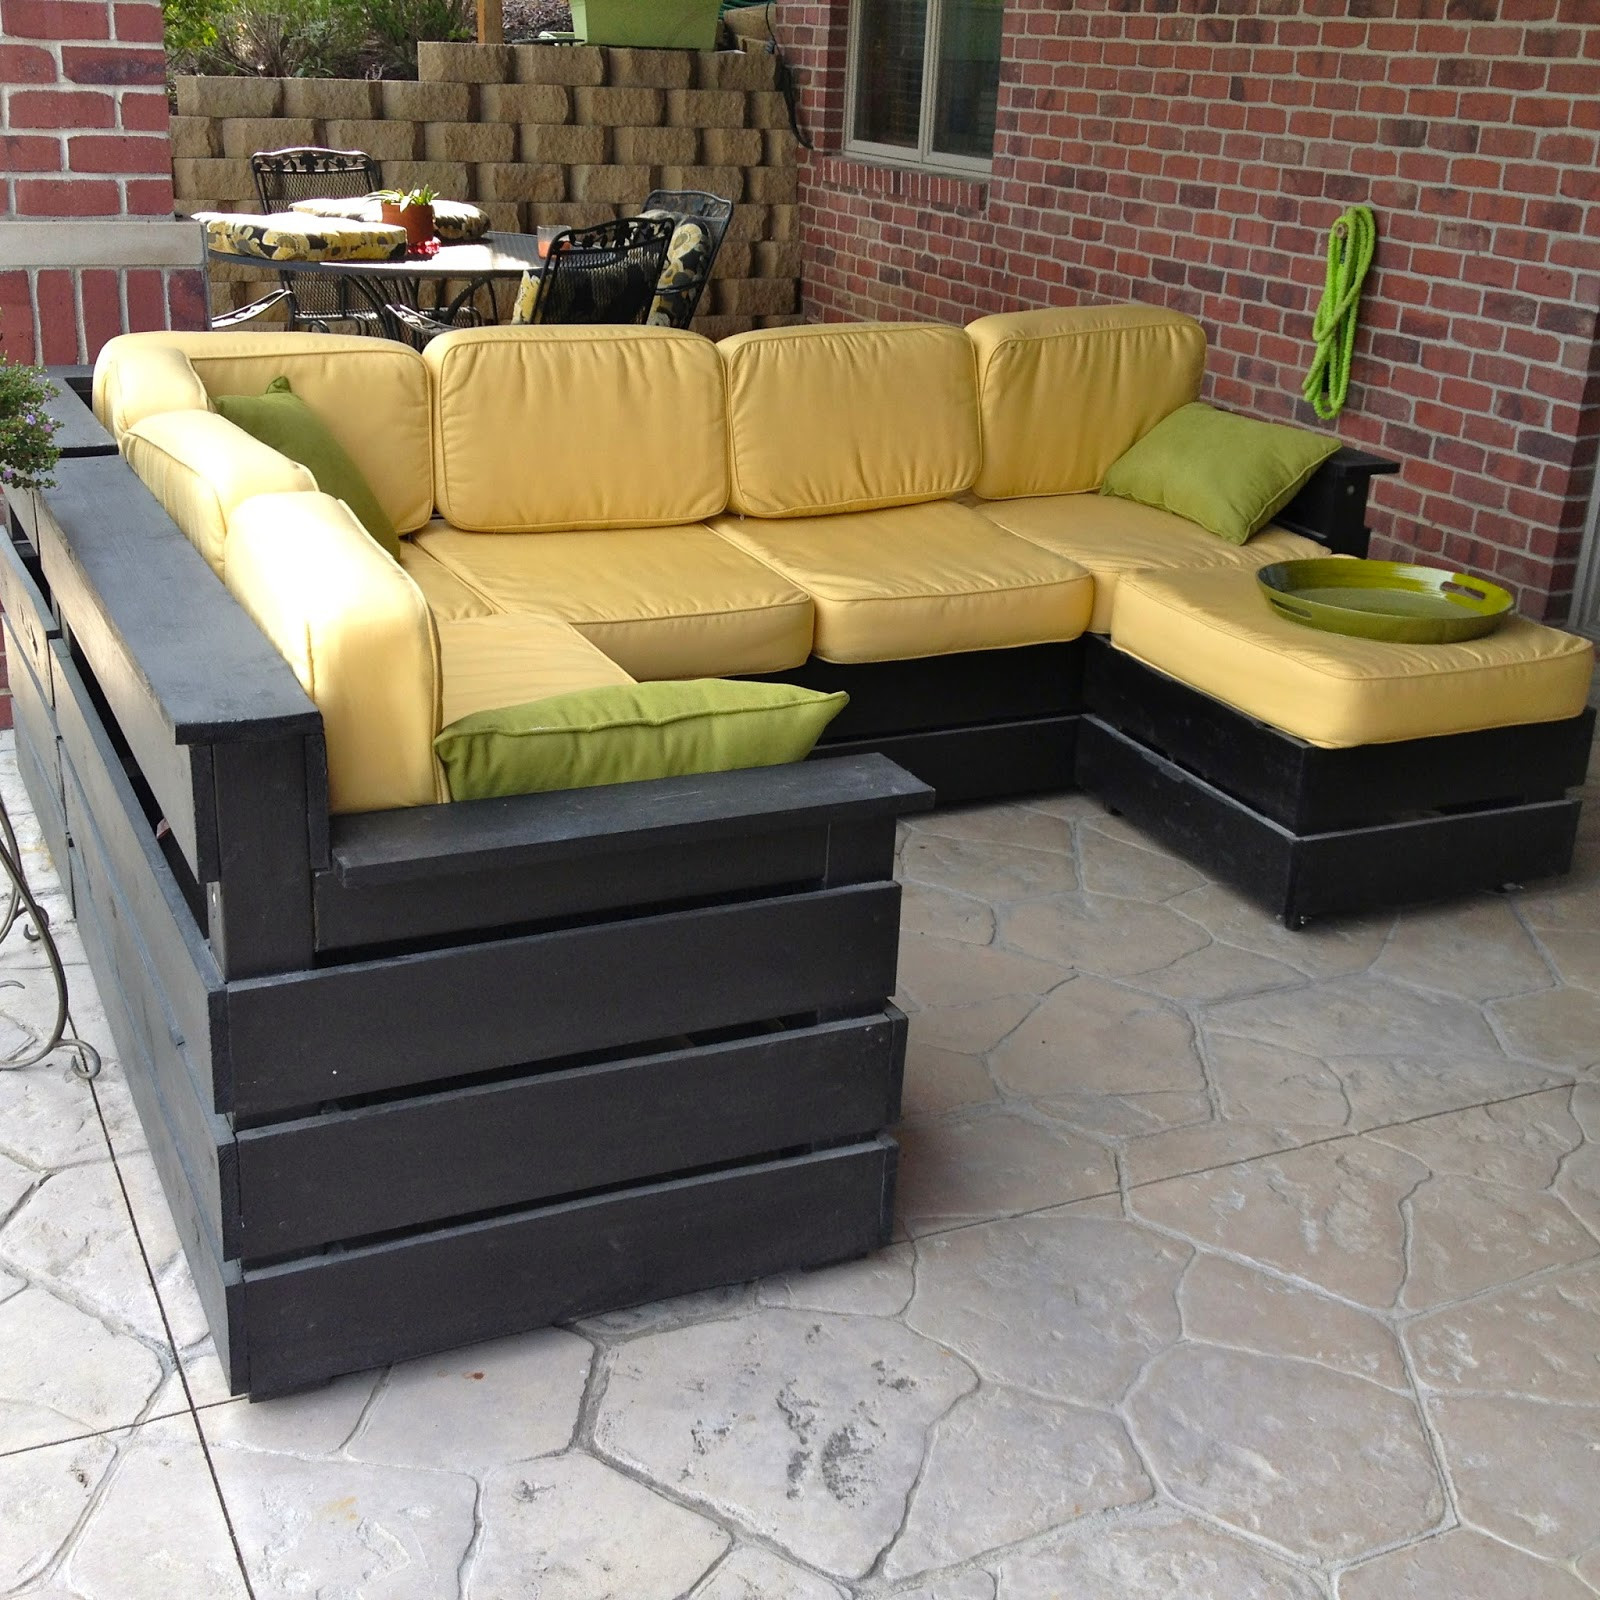 DIY Outdoor Sectional Sofa
 DIY Why Spend More DIY Outdoor Sectional